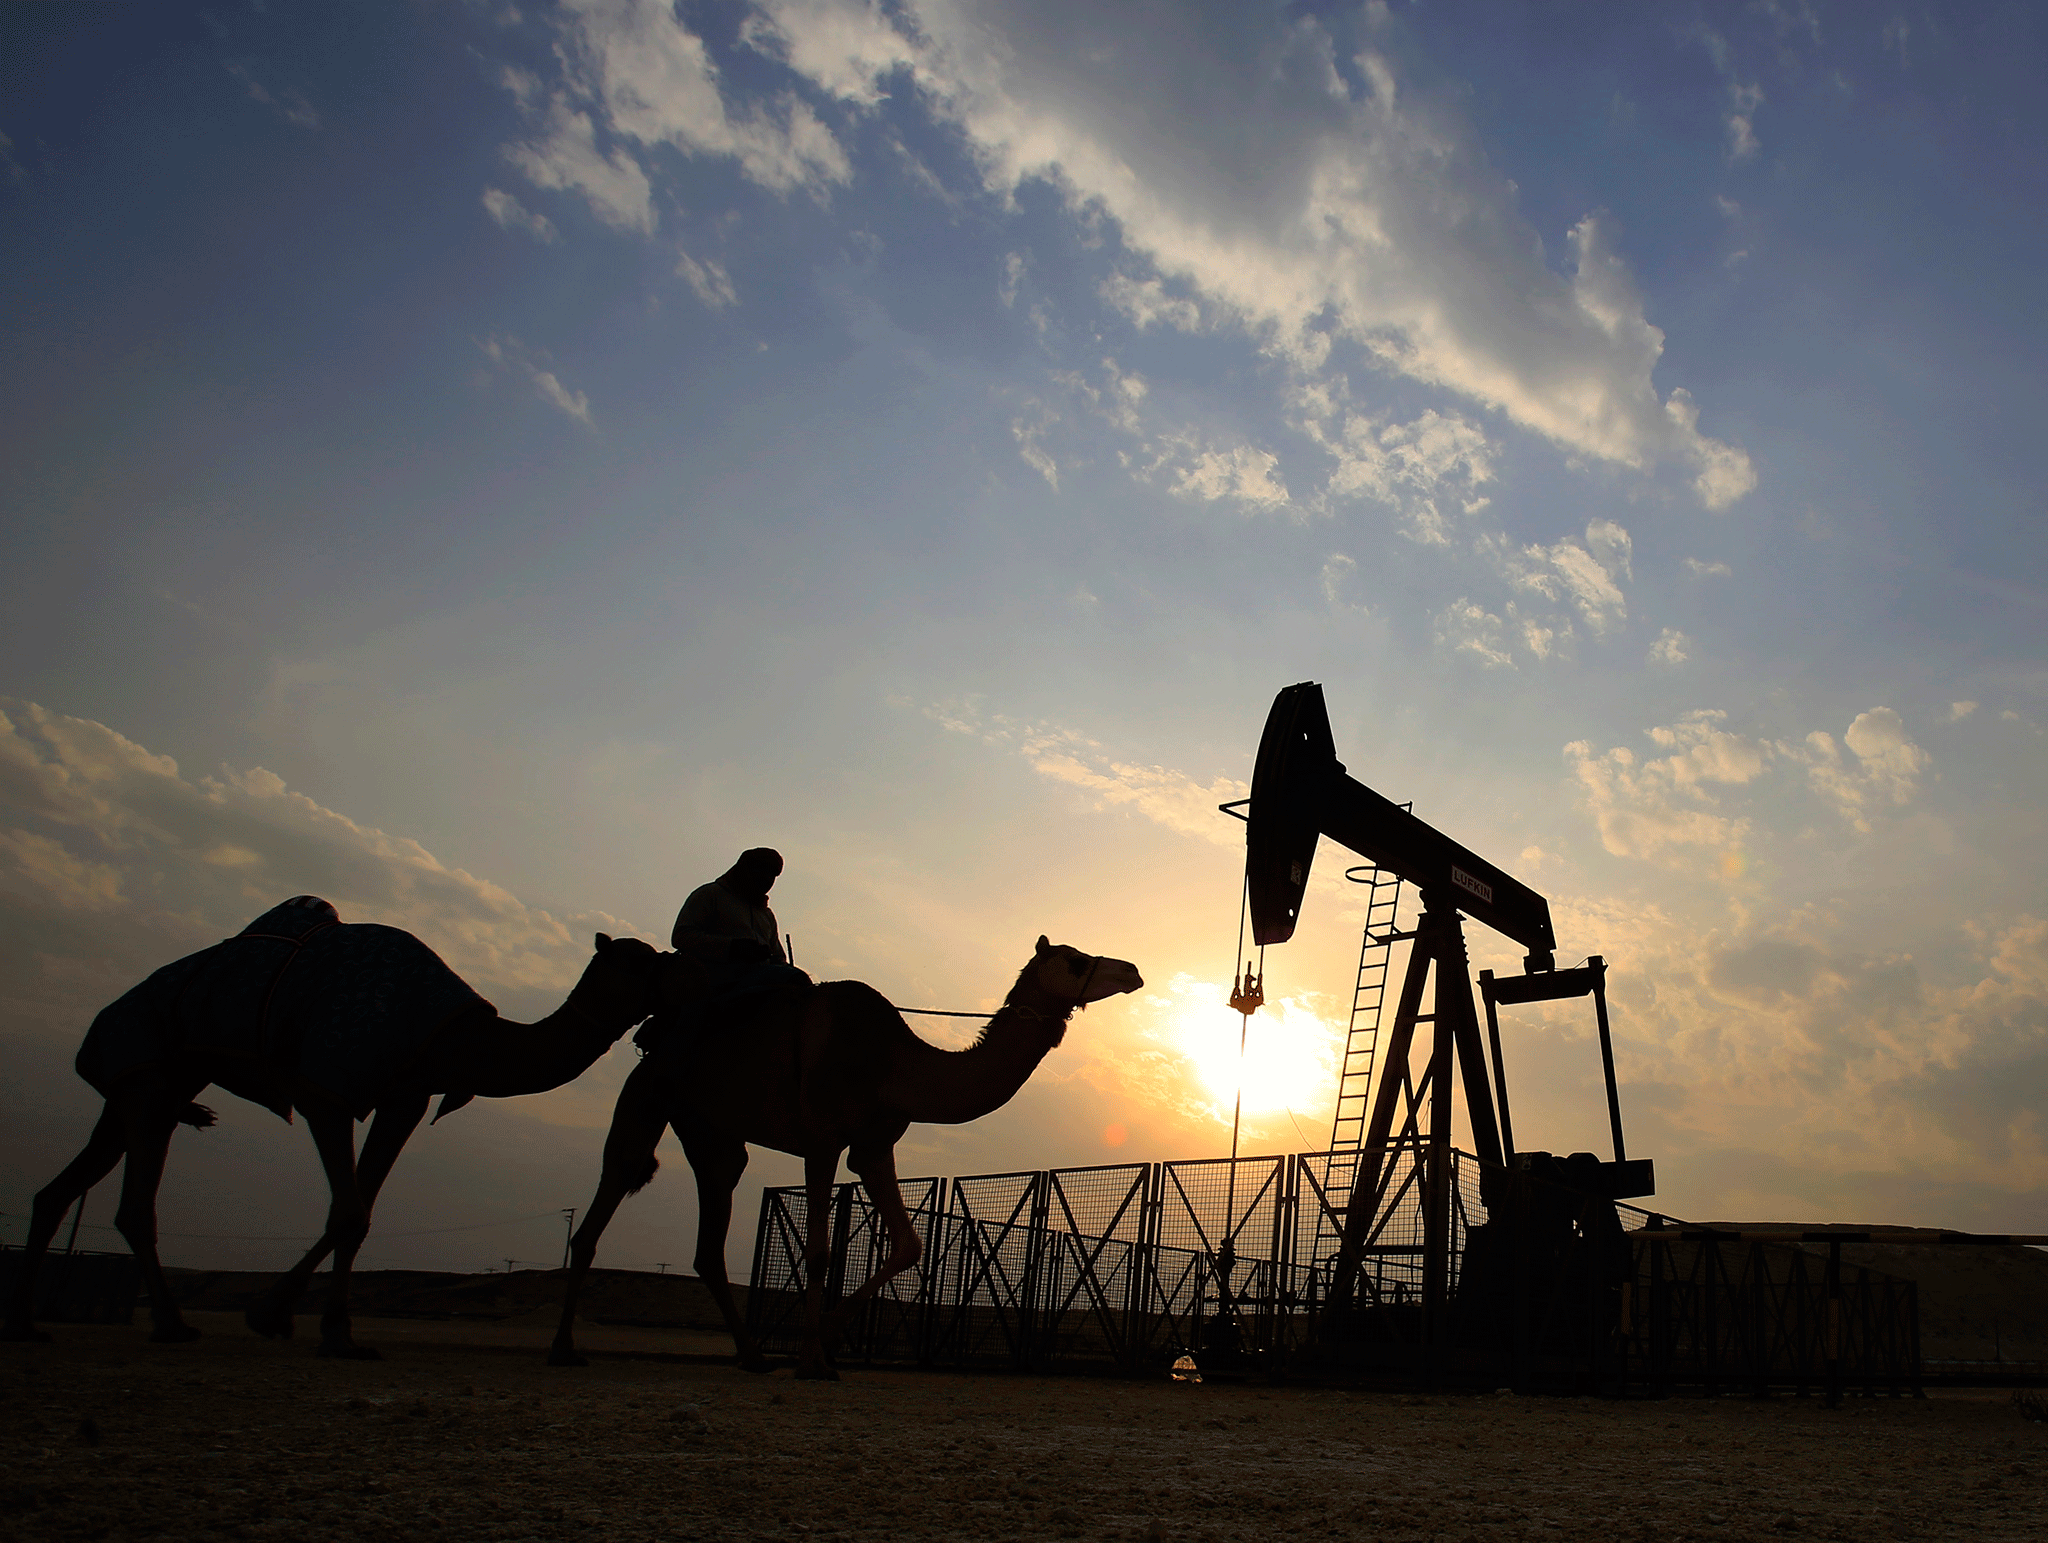 Opec's production cut sends oil price higher. But it might not last